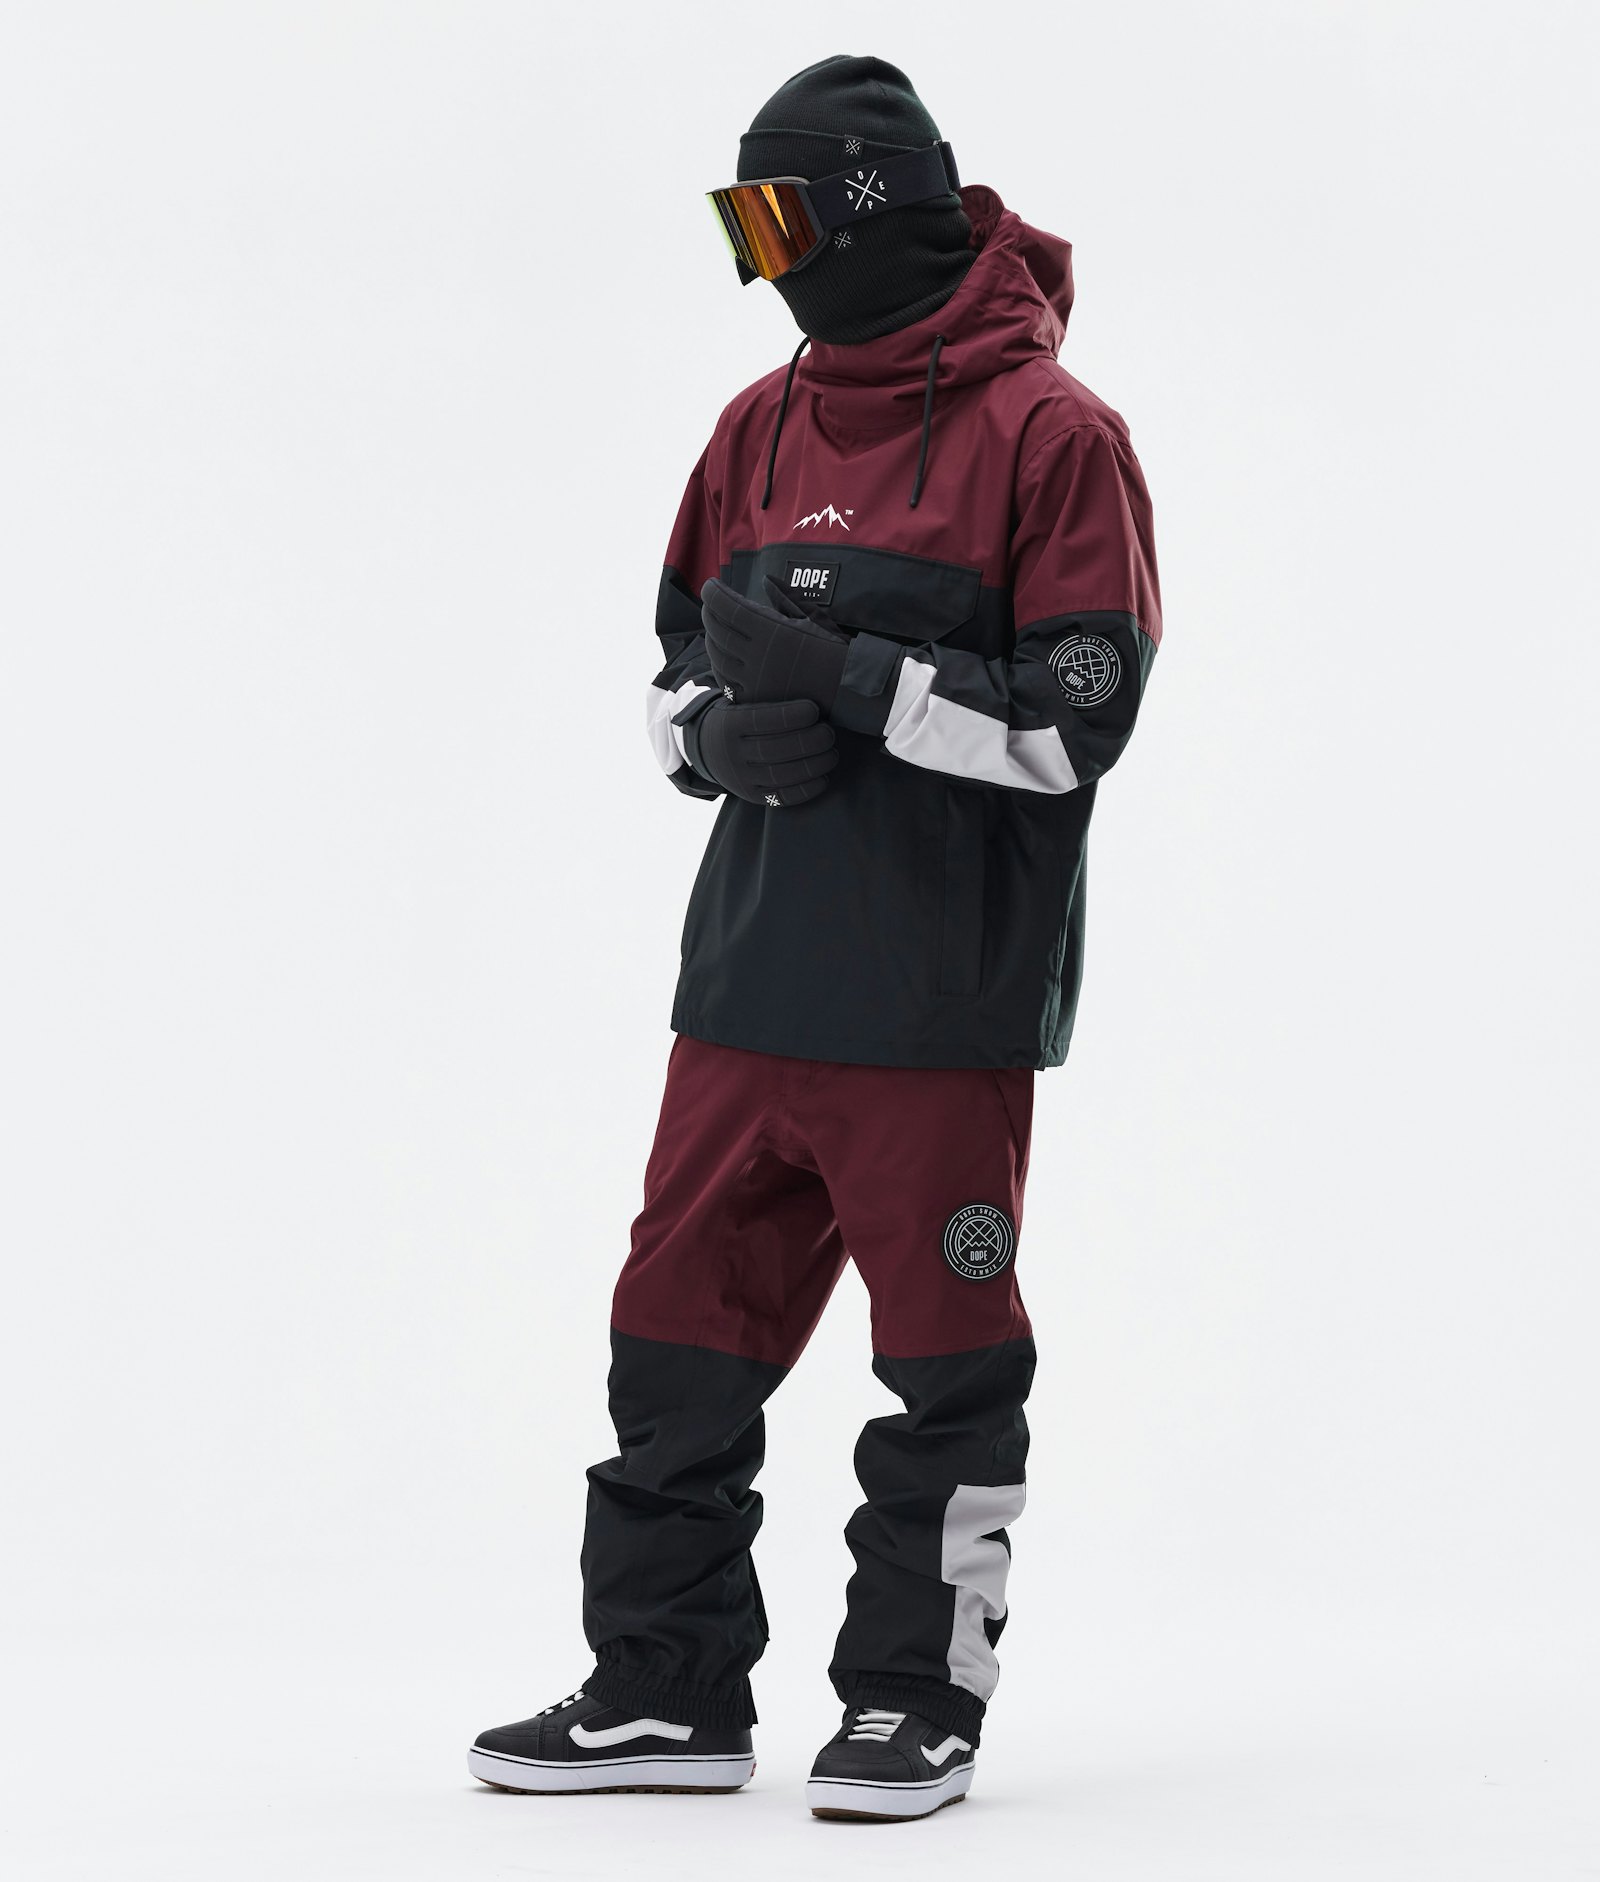 Dope Blizzard 2020 Snowboard Jacket Men Limited Edition Burgundy Multicolour, Image 6 of 8